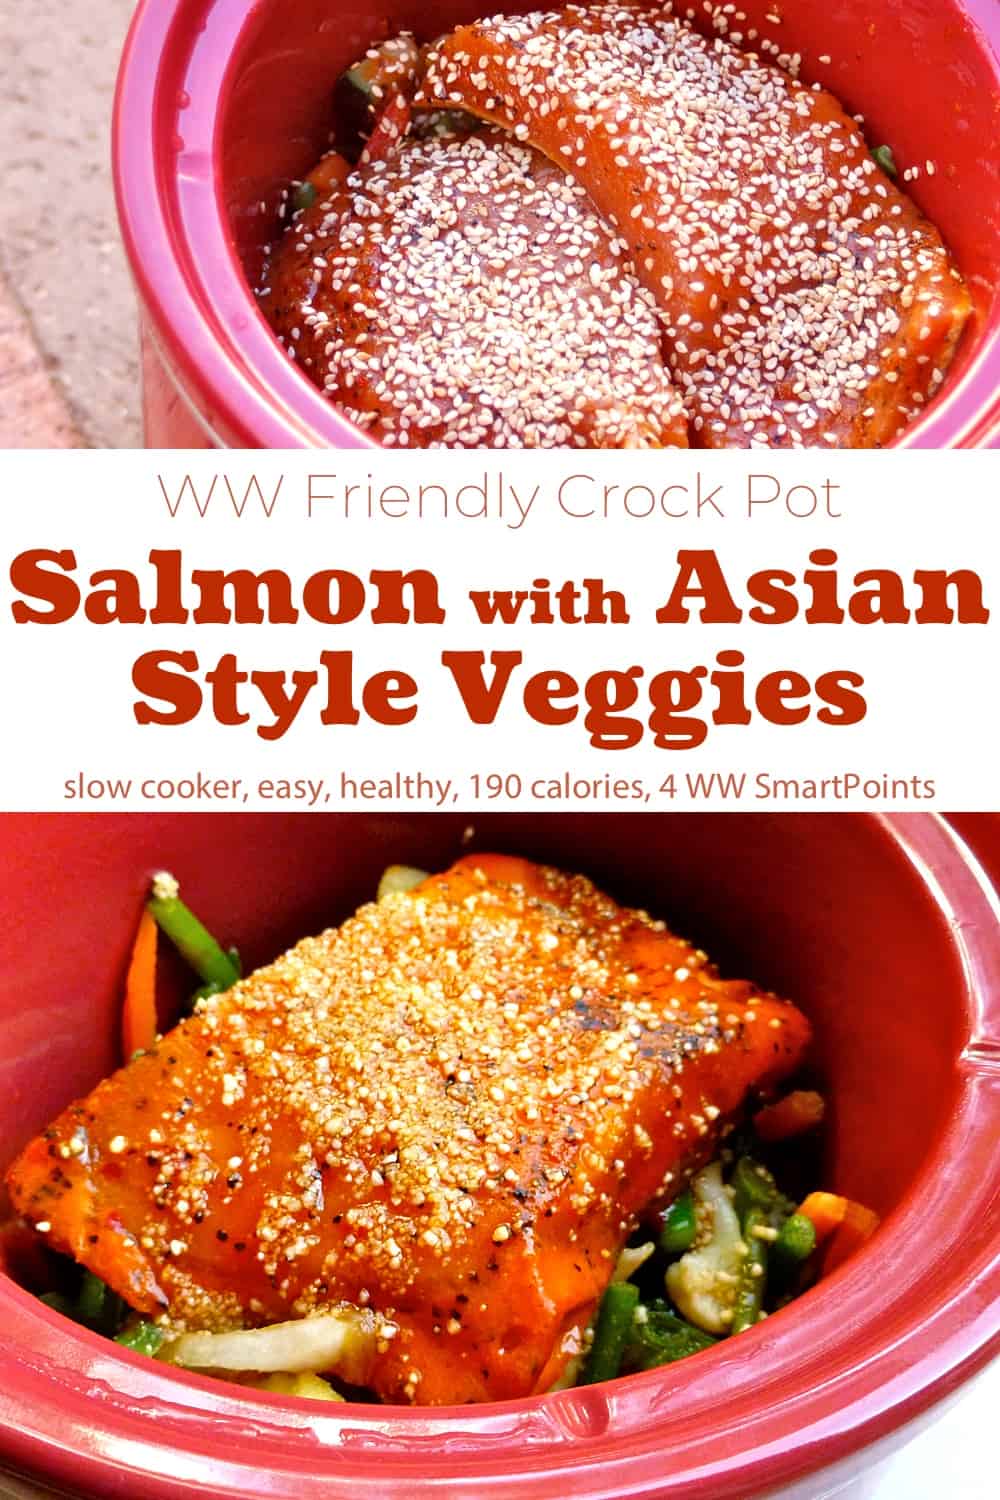 Red crock pot with salmon fillets and sesame seeds over Asian-style vegetables.